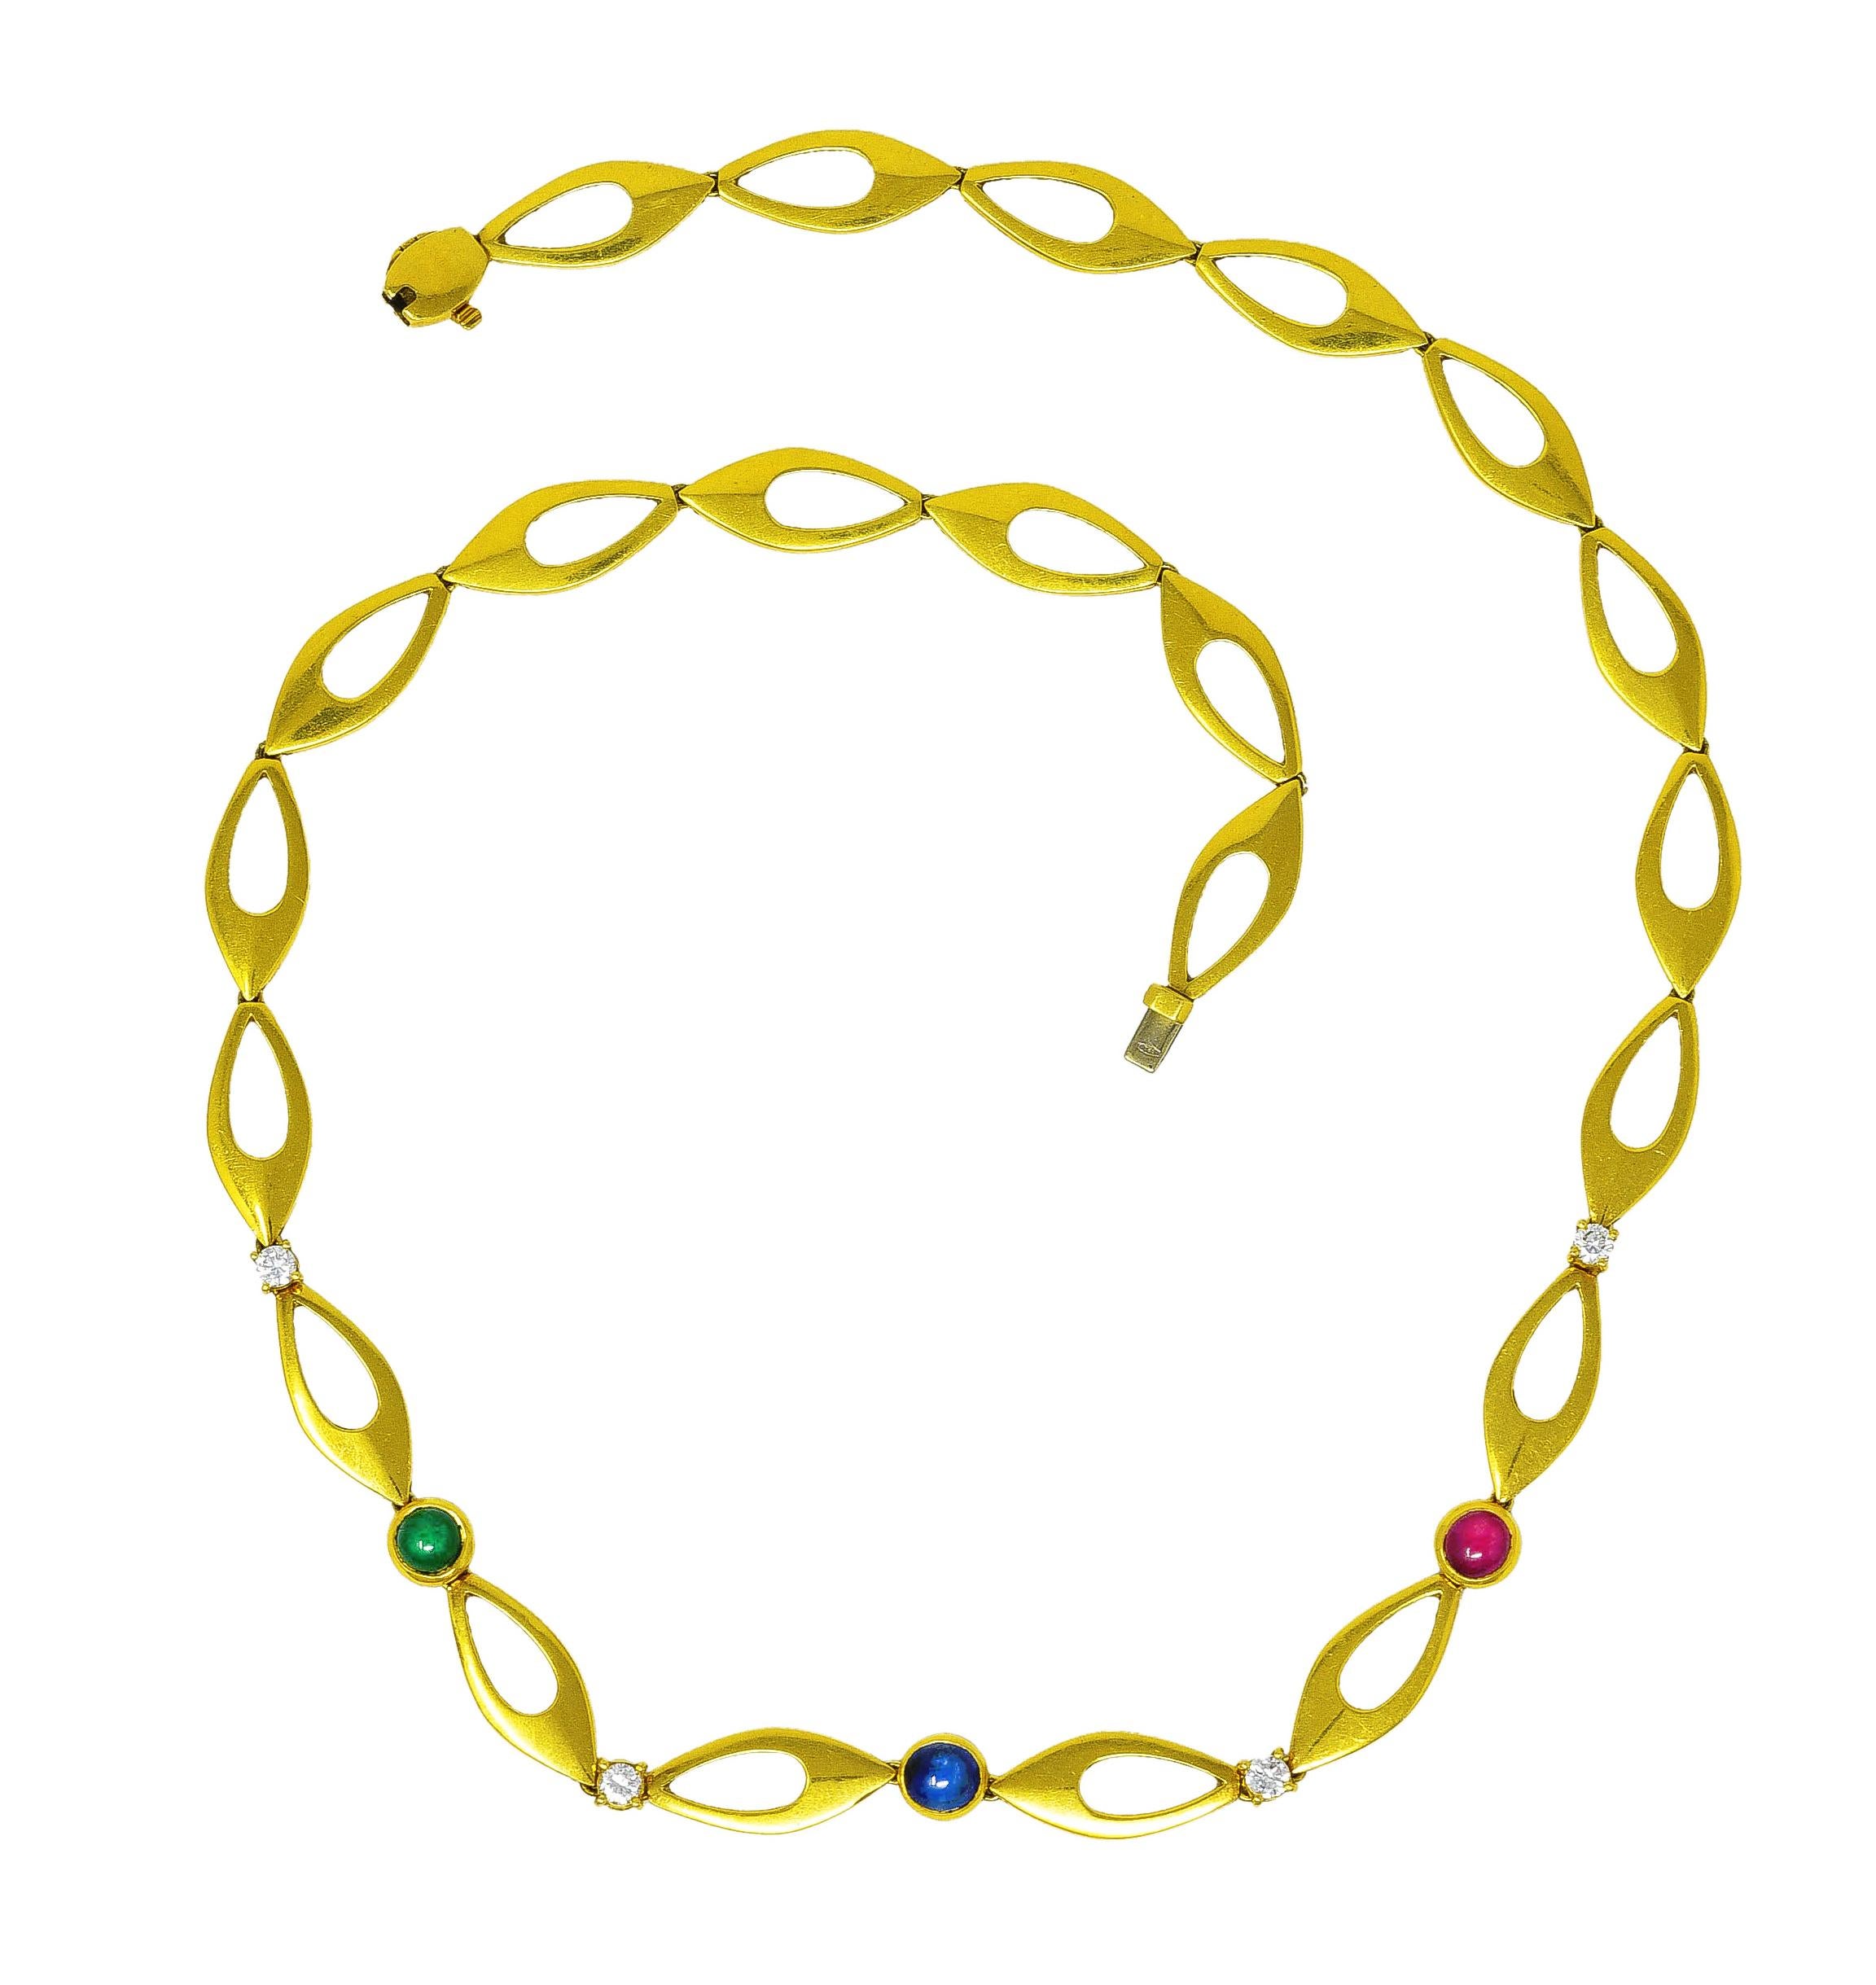 Necklace is comprised of asymmetrical ellipse style links alternating with gemstone stations. Featuring three bezel set cabochons of ruby, emerald, and a sapphire. Brightly colored and weighing collectively approximately 1.80 carats. With round